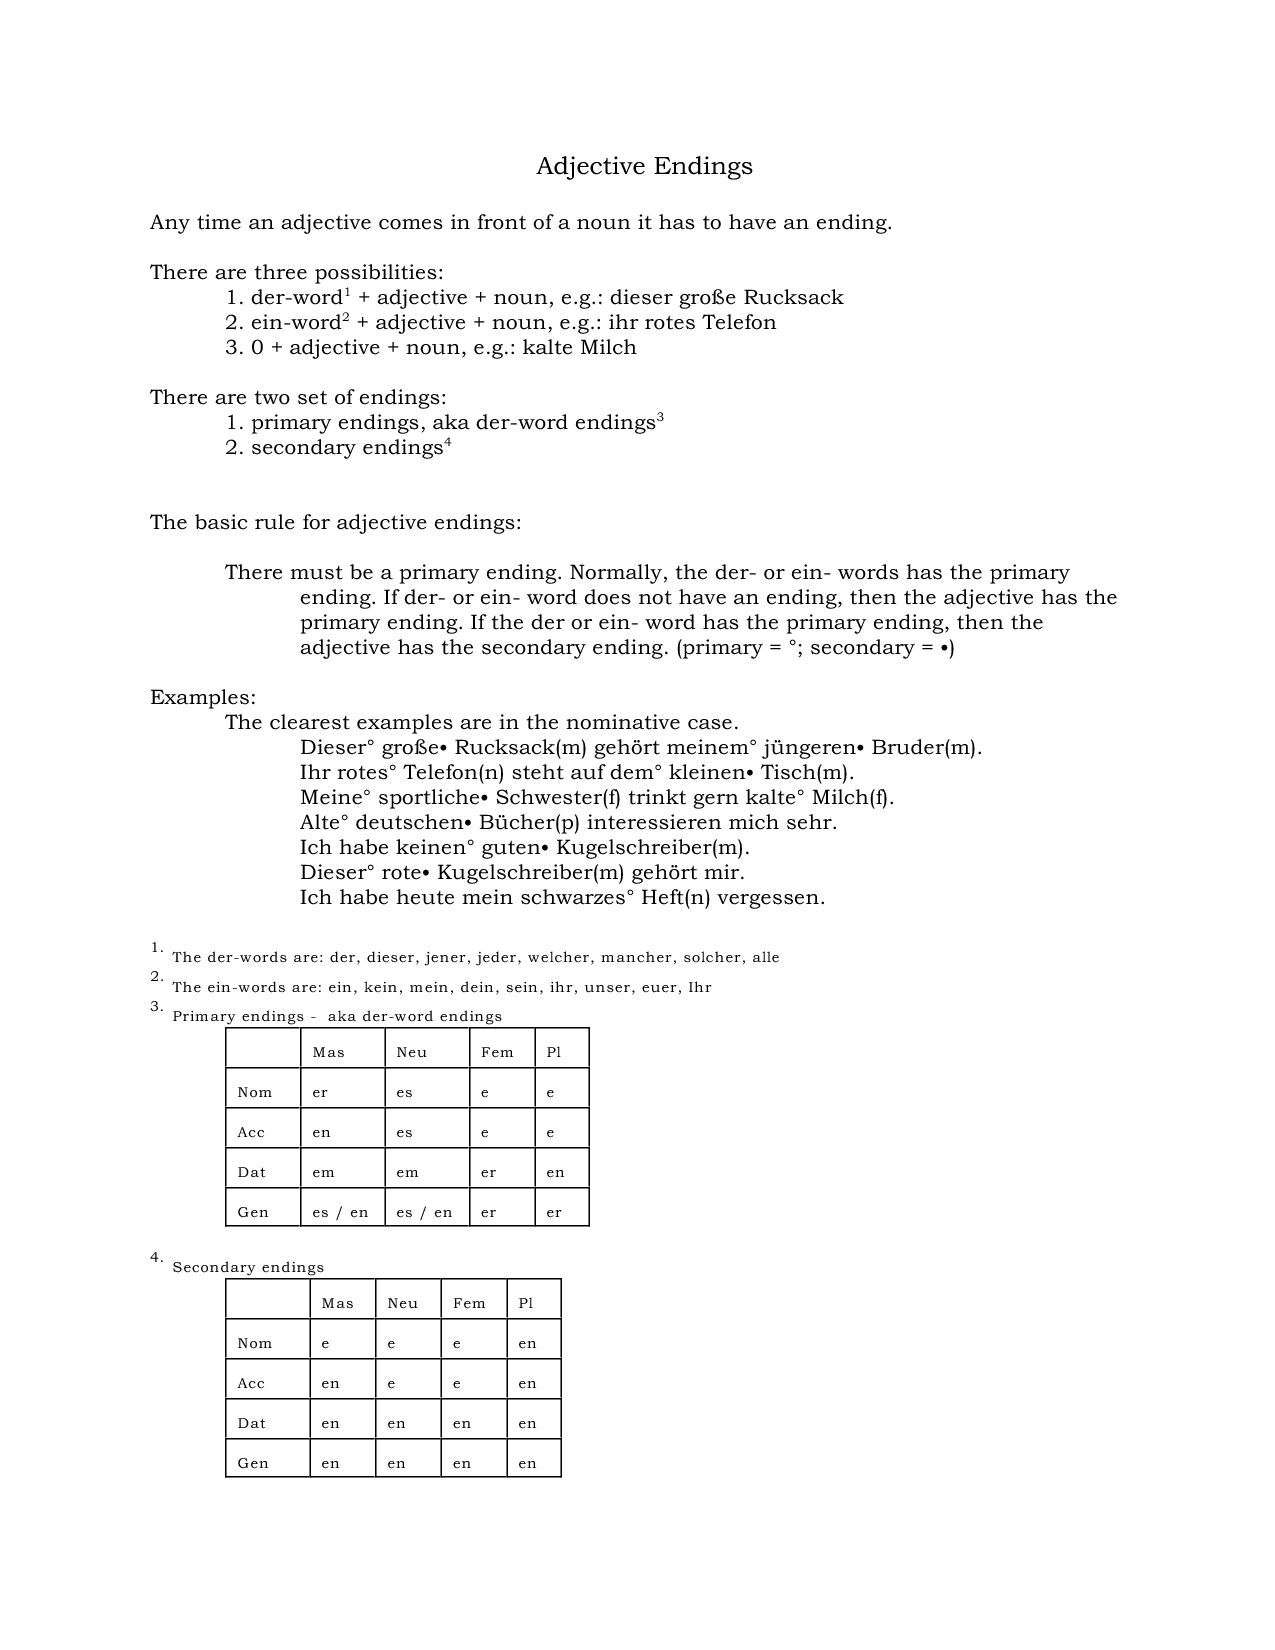 18-best-images-of-predicate-nominative-practice-worksheet-subject-and-predicate-worksheets-3rd